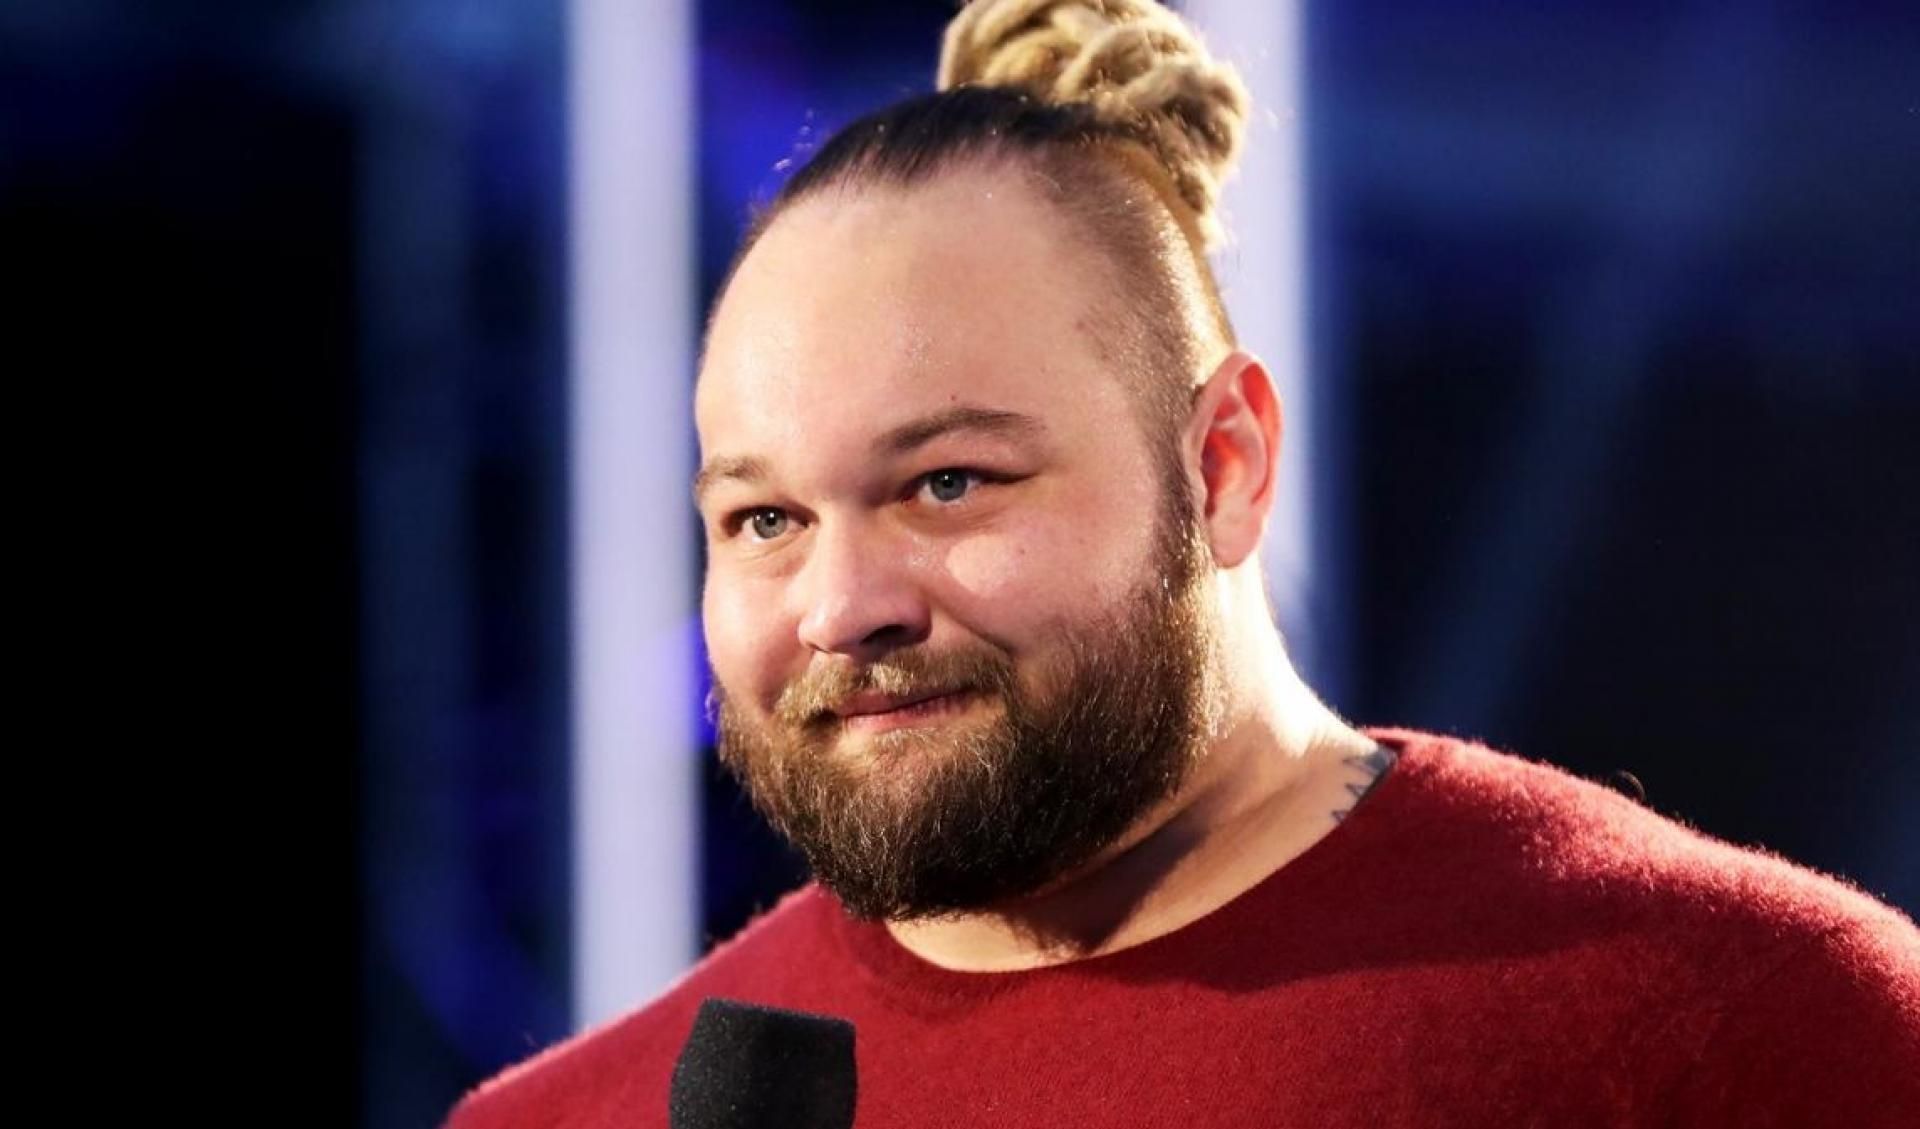 Bray Wyatt has not been seen in WWE for two months